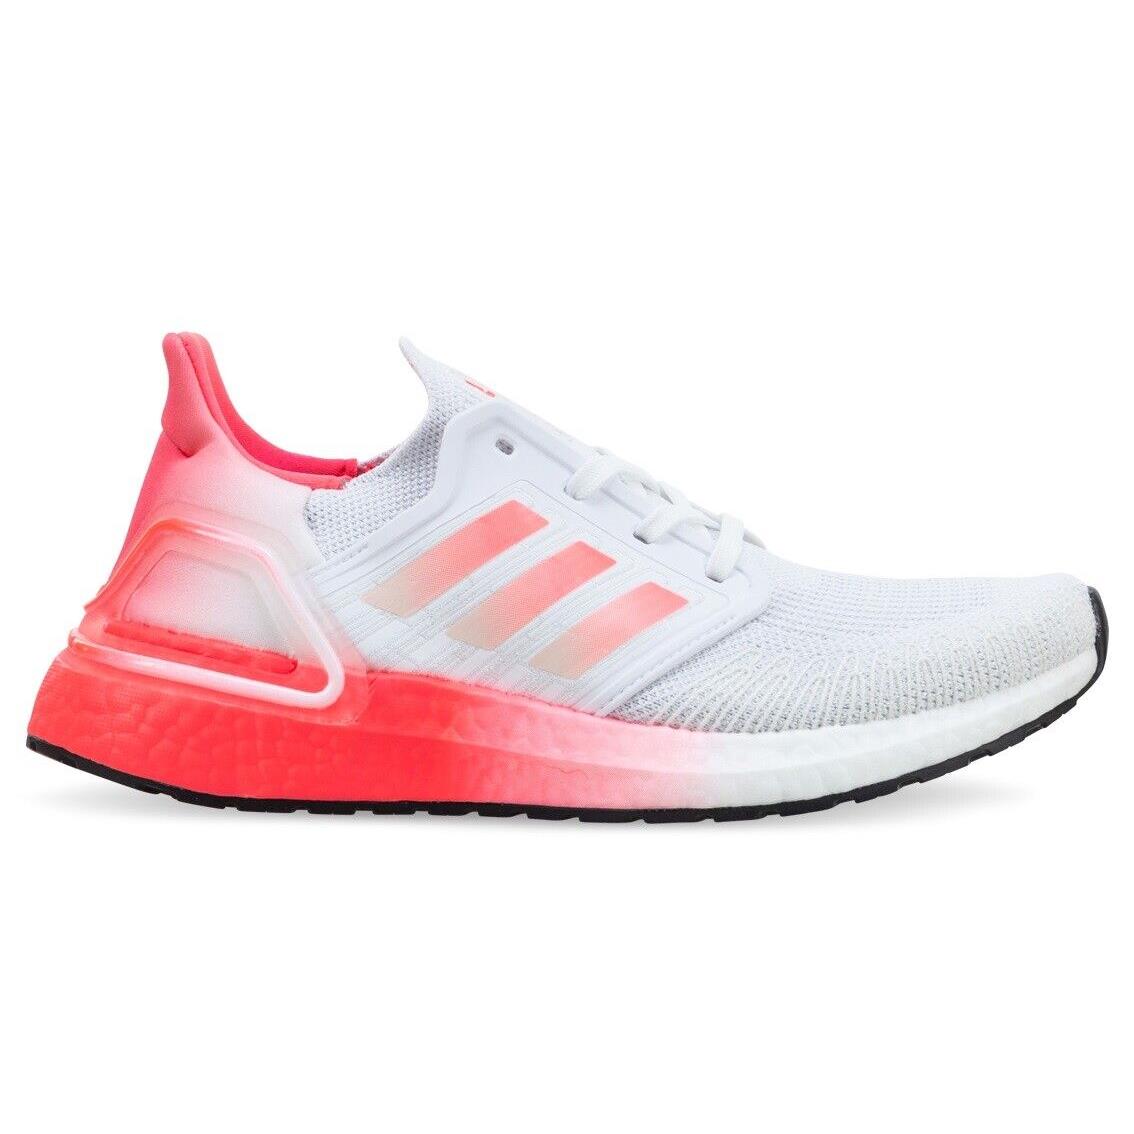 Adidas Ultra Boost 20 Womens EG5201 White Signal Pink Running Shoes Size 10 - White/Signal Pink